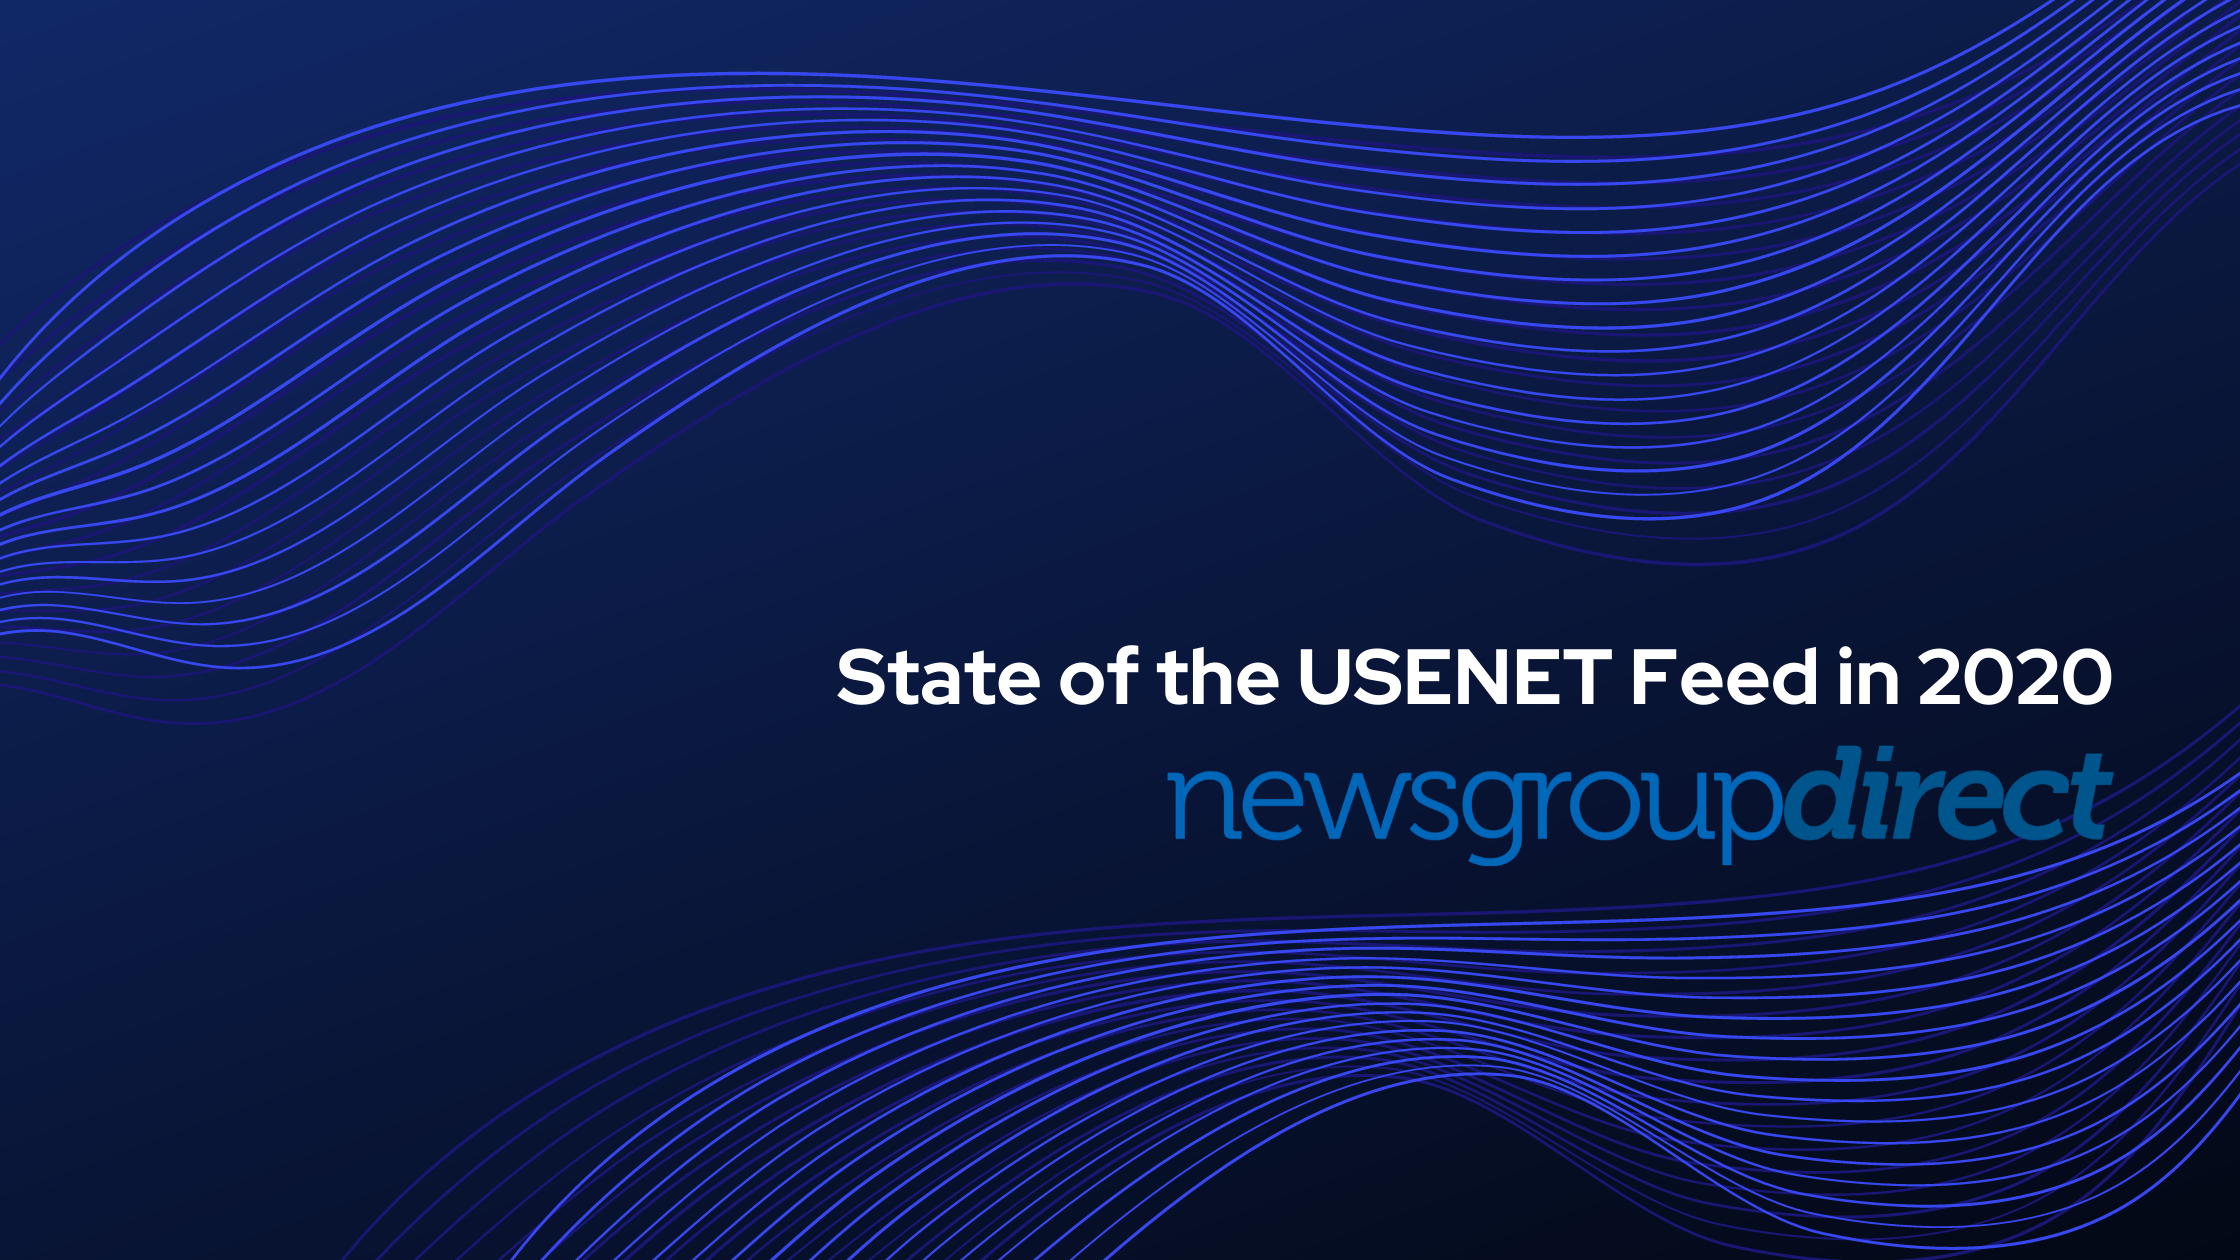 State of the USENET Feed in 2020